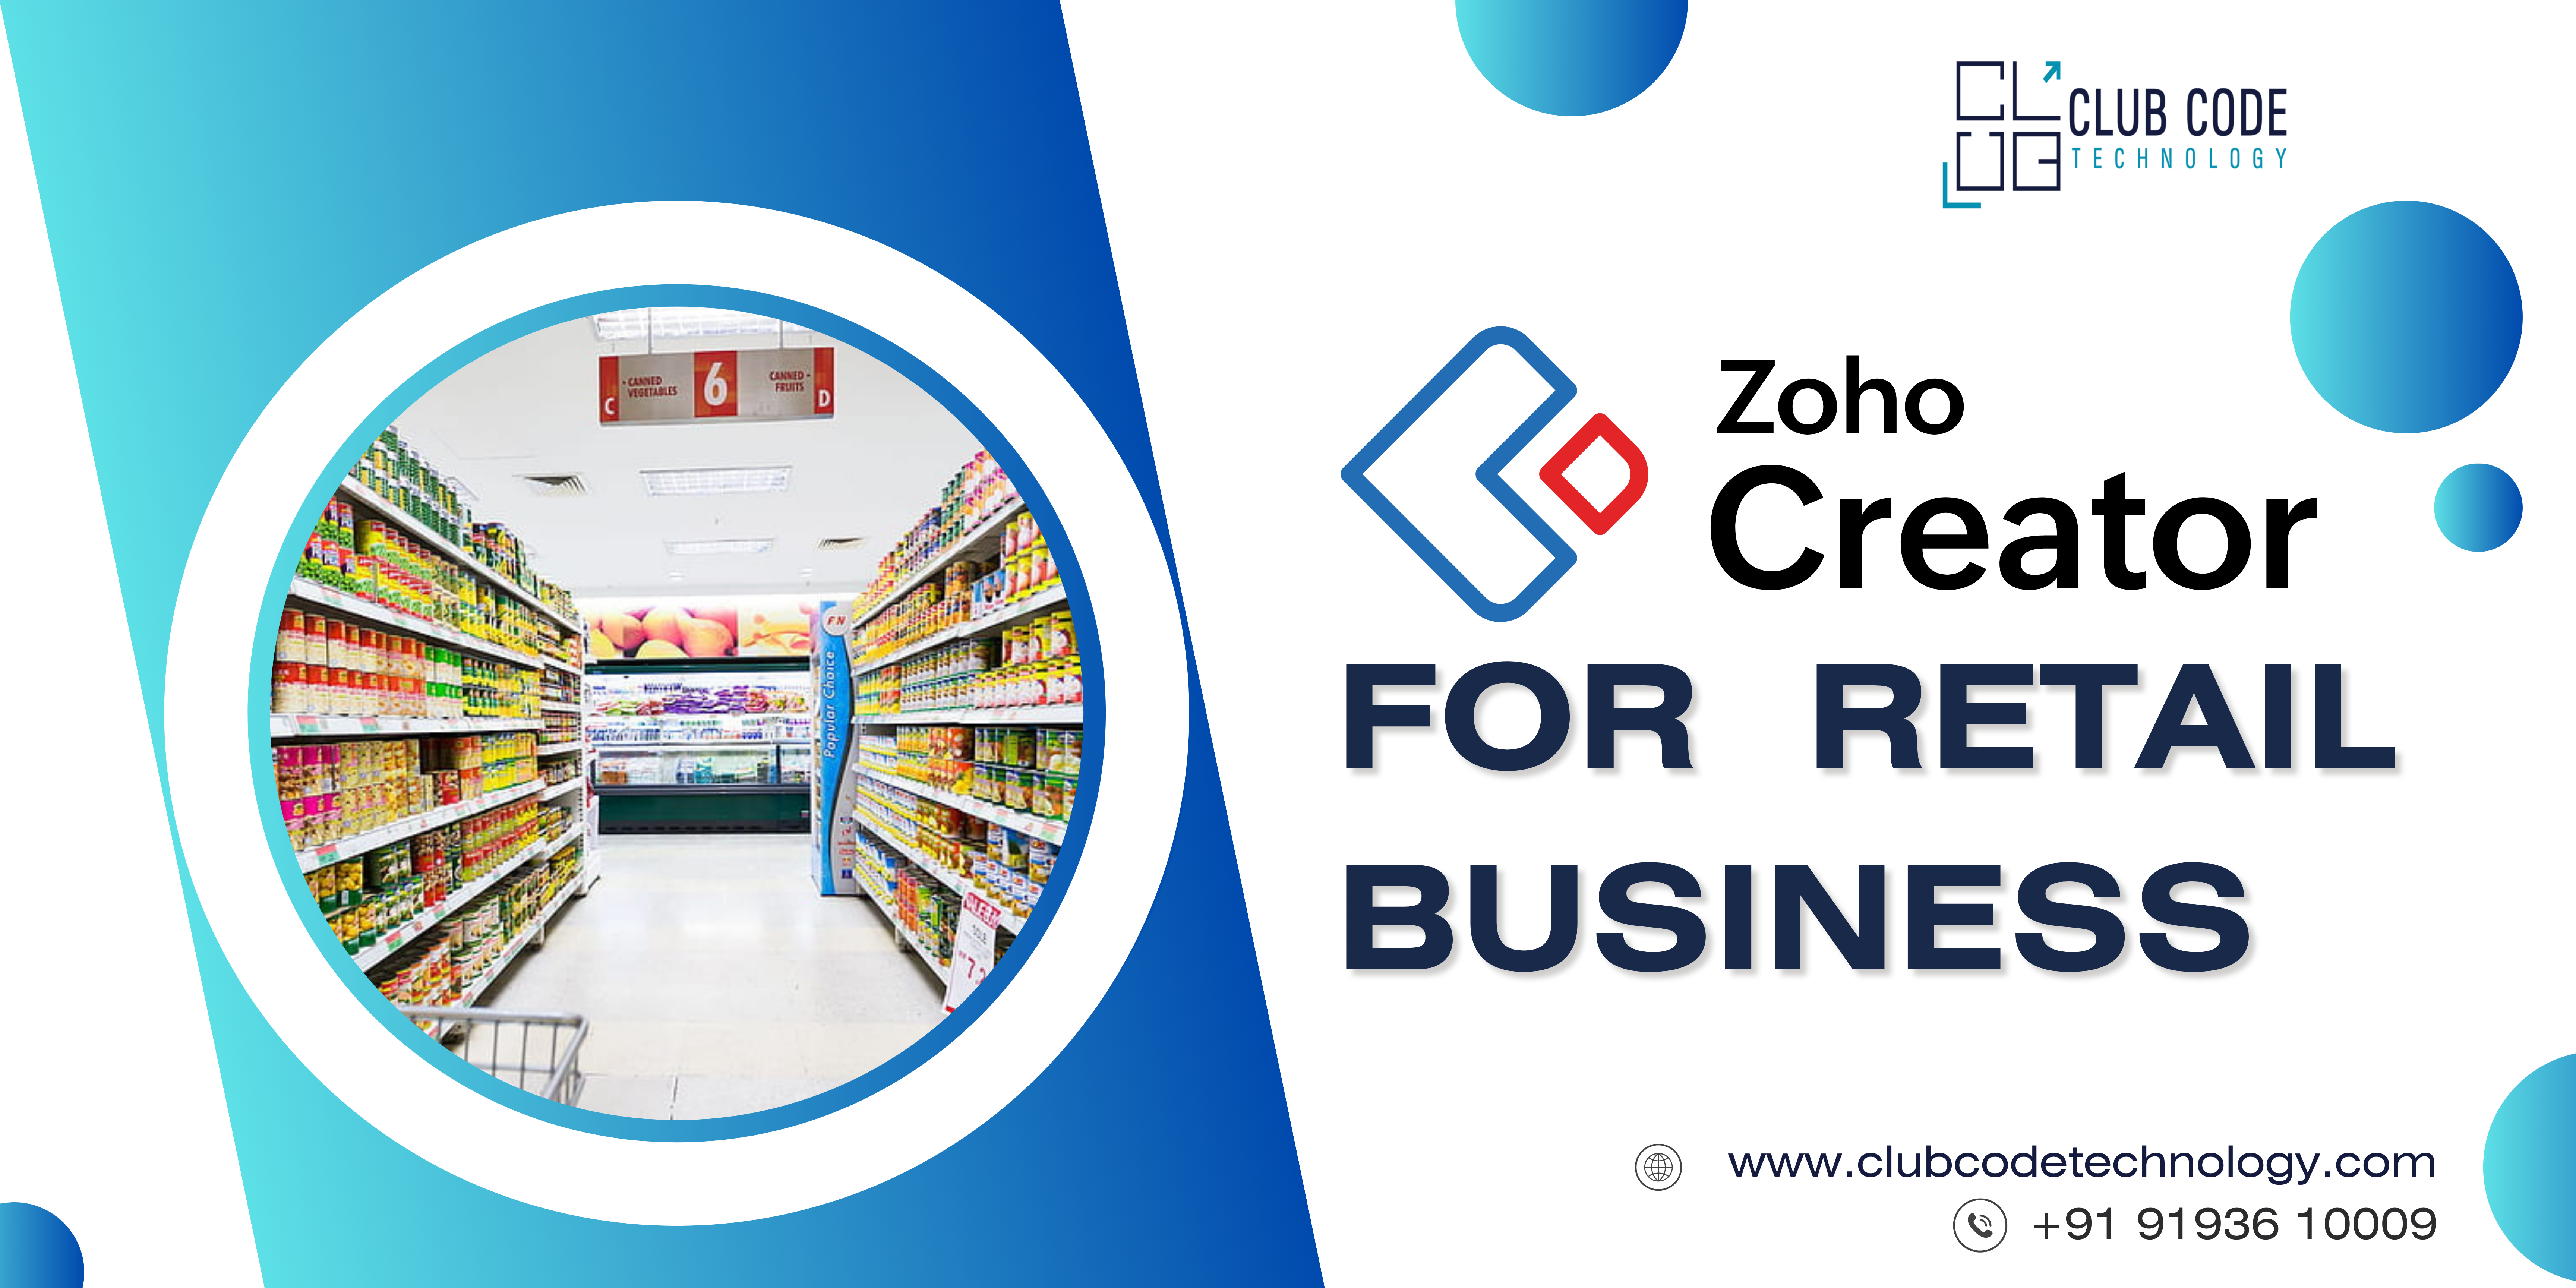 Zoho Creator for Retail Business
